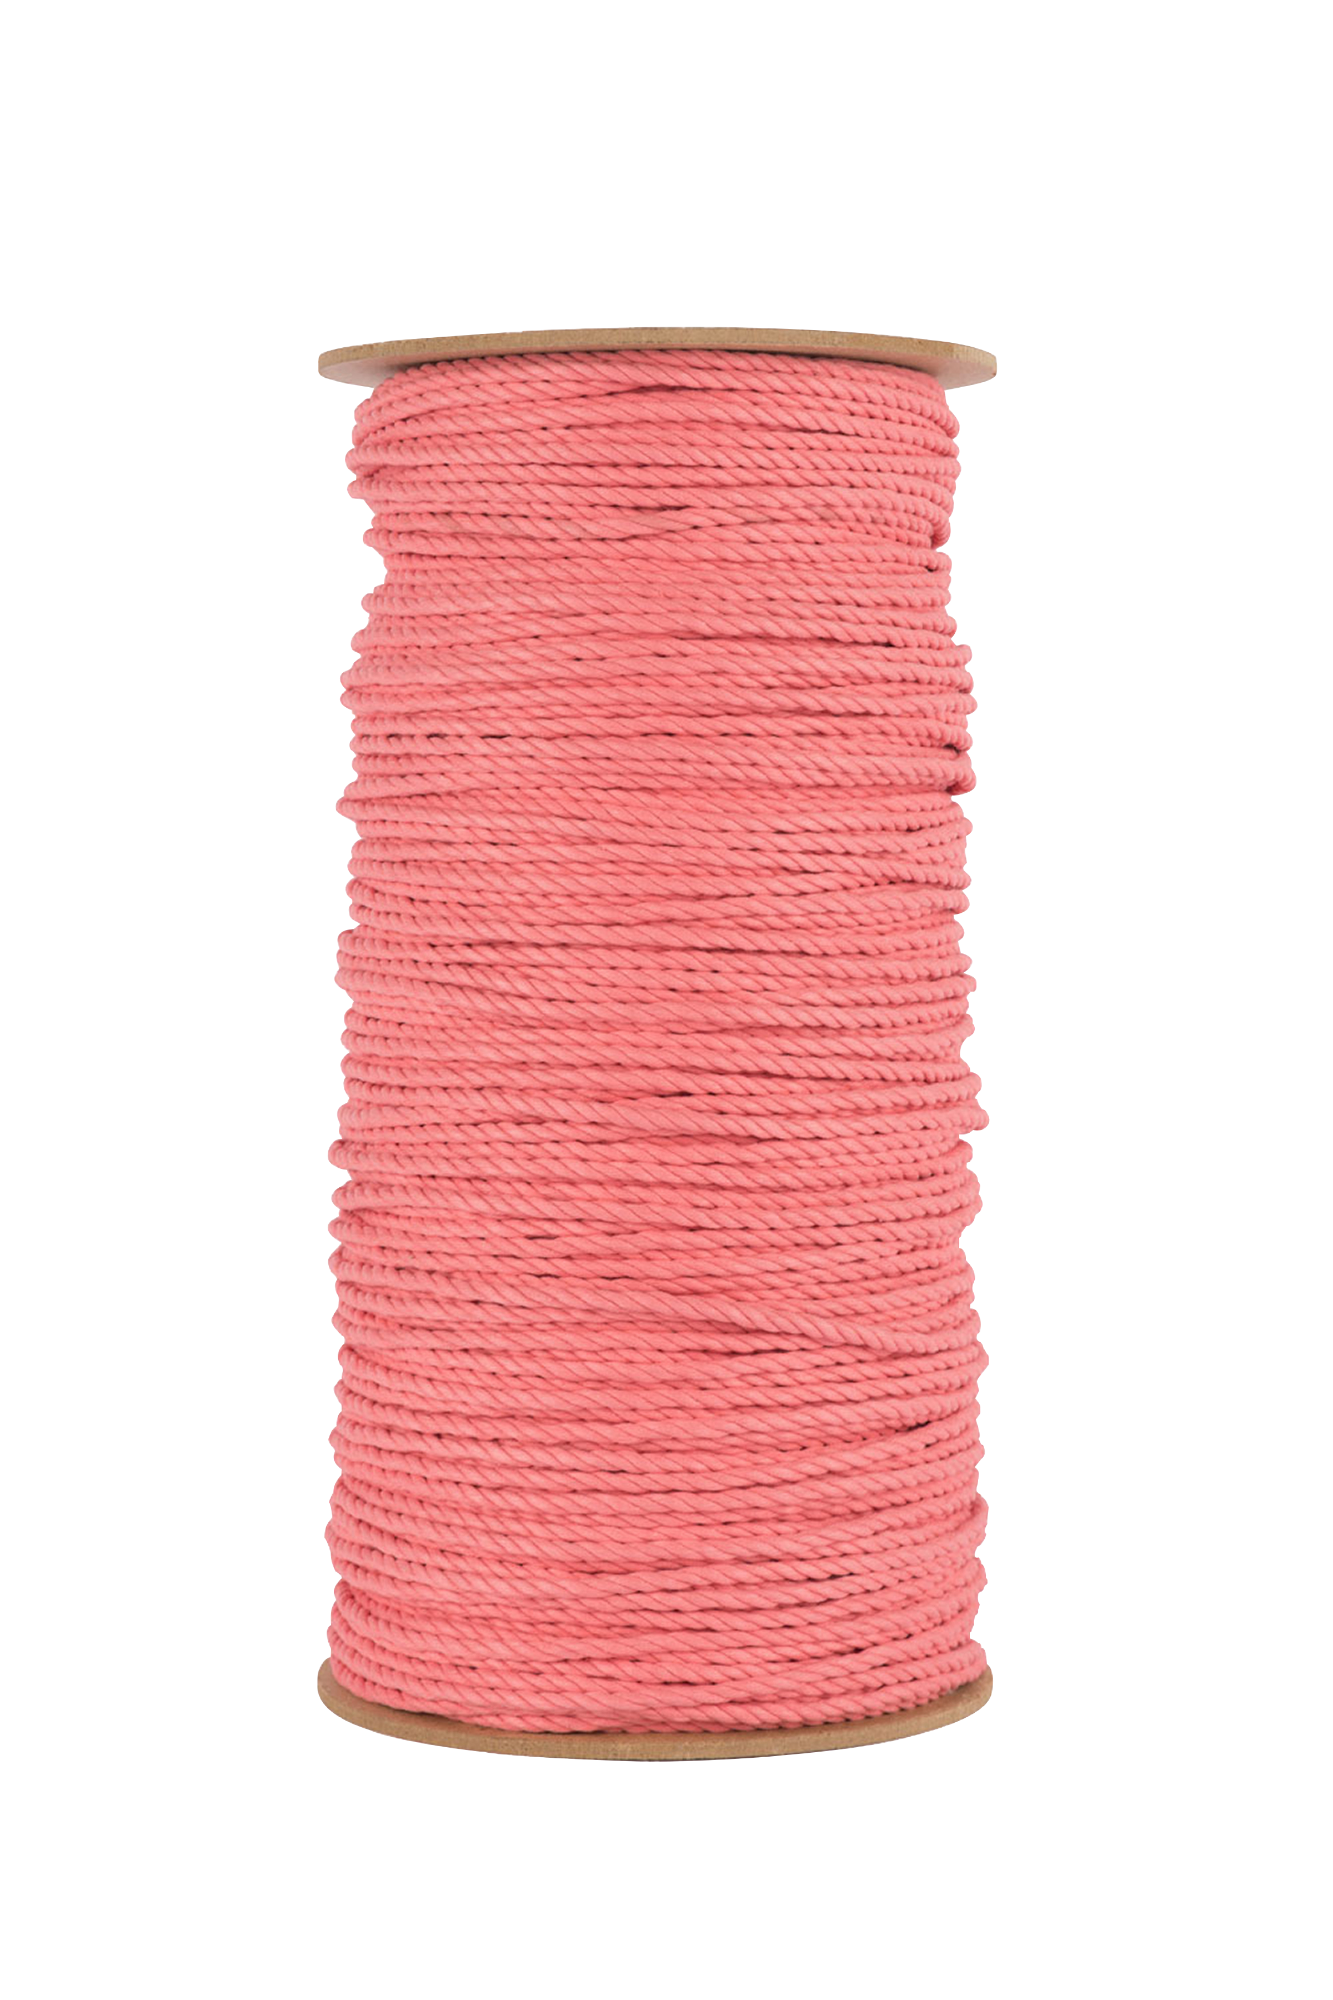 5mm Cotton Rope 1000 ft